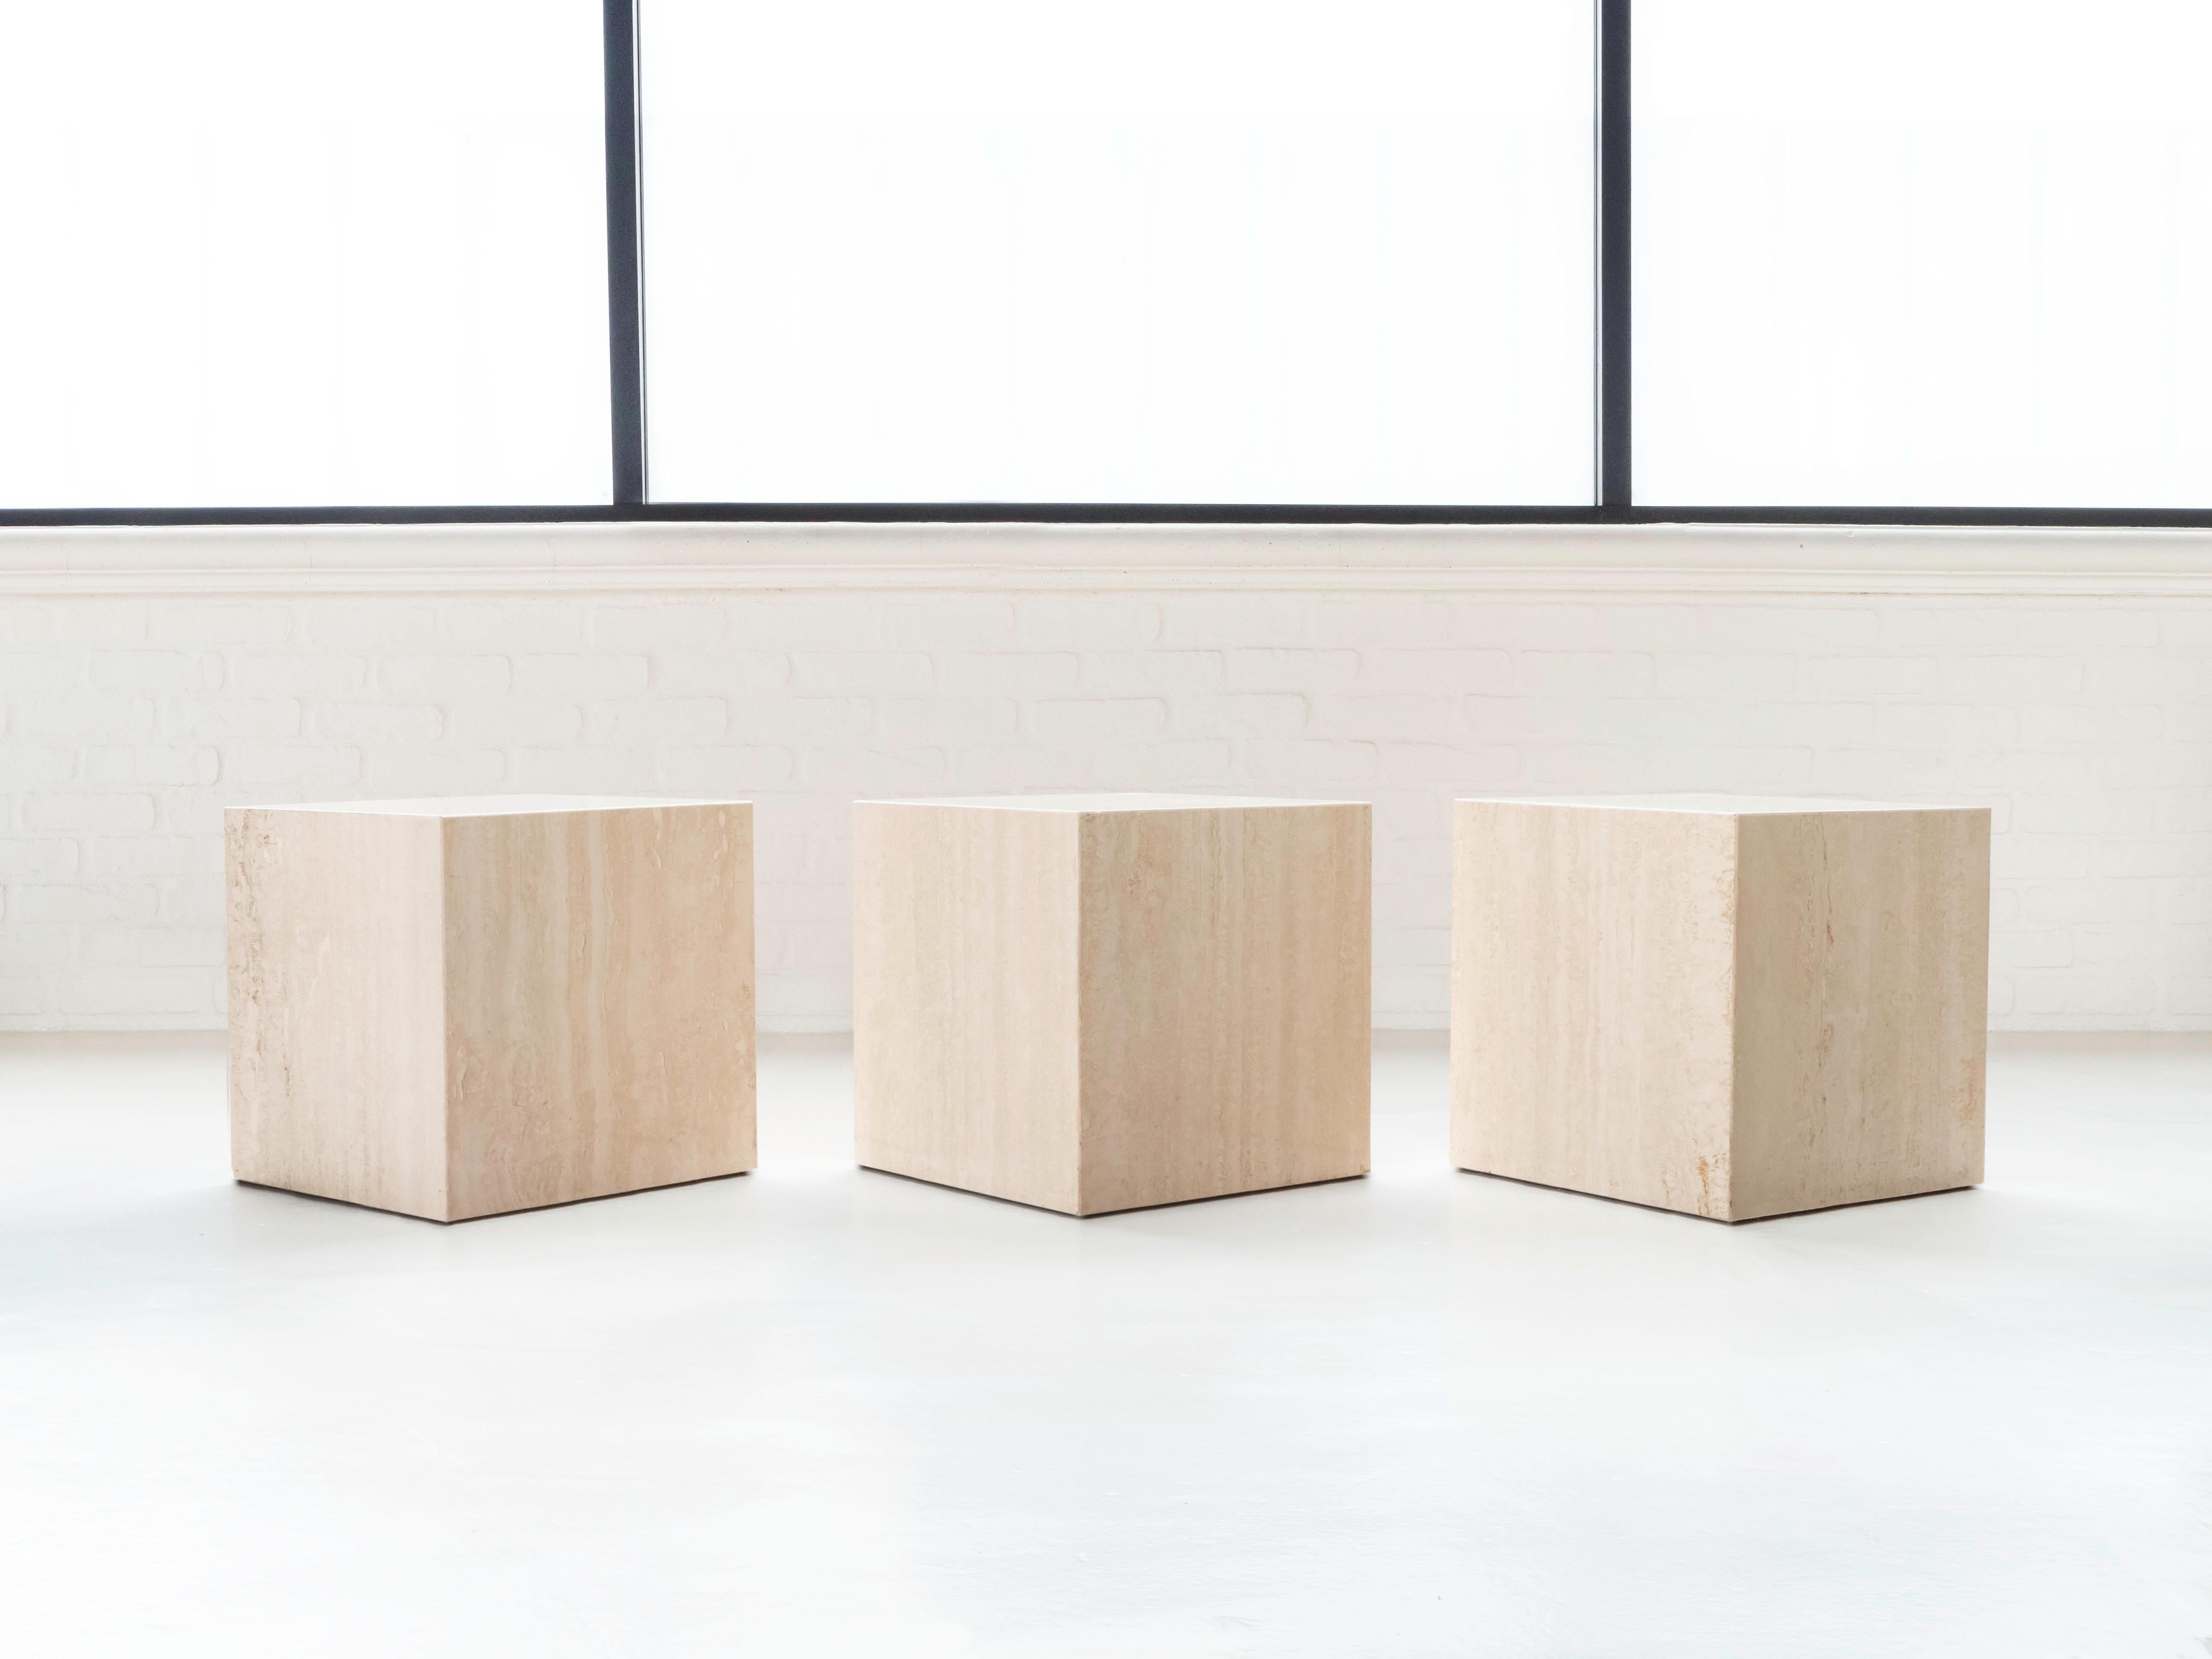 Italian Travertine Set of 3 Cube Shaped Side Tables / Pedestals, Circa 1970's 2